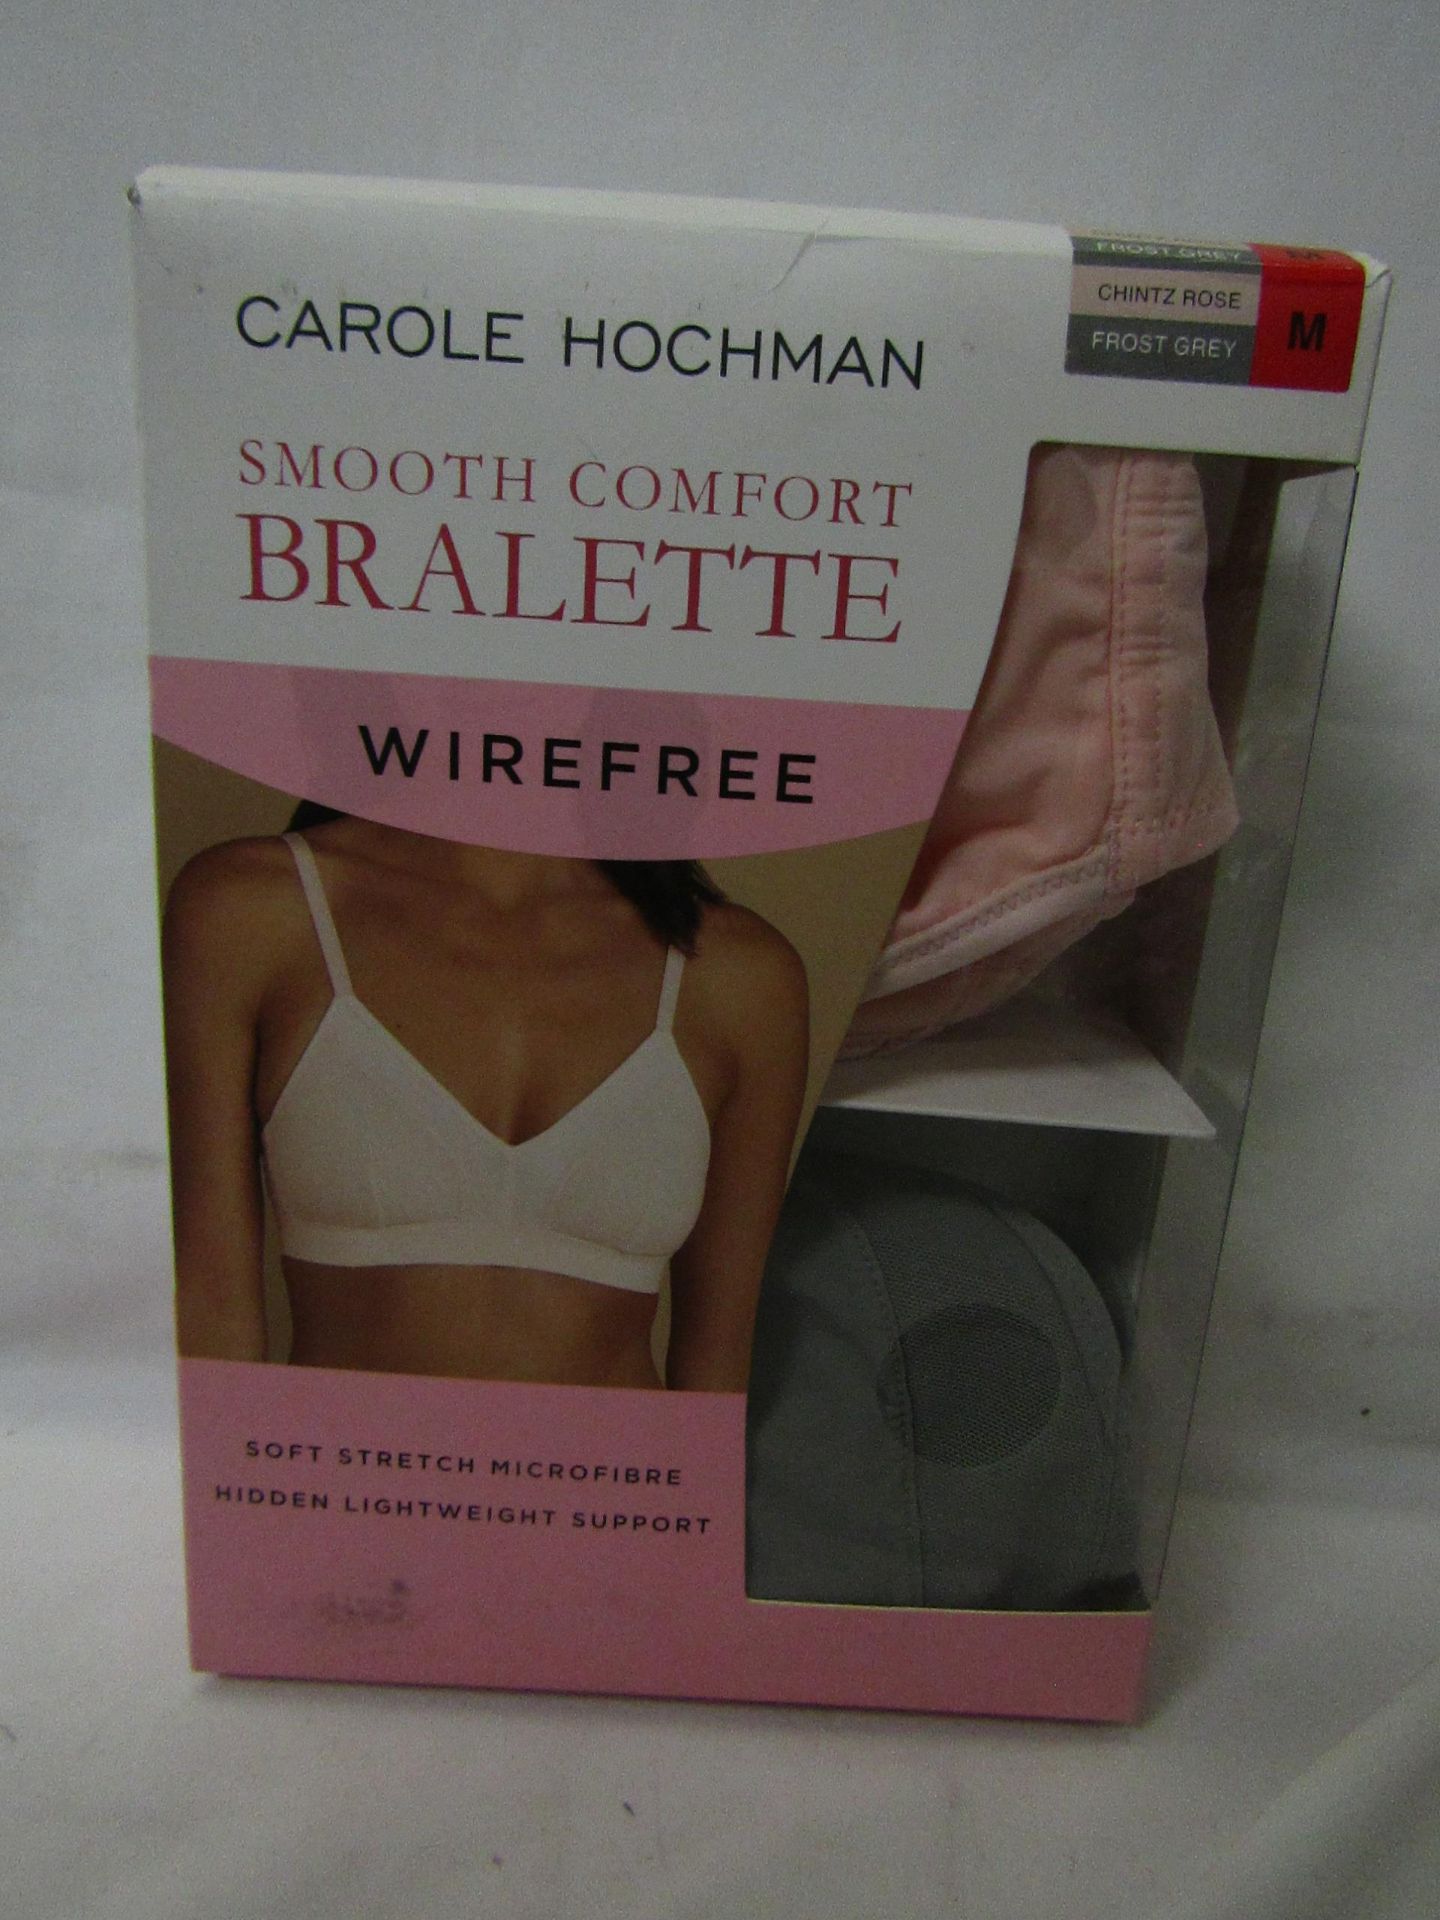 1 X PK of 2 Carole Hochman Wirefree Bralette Size M New & Boxed (Picked at Randon So Colours Will